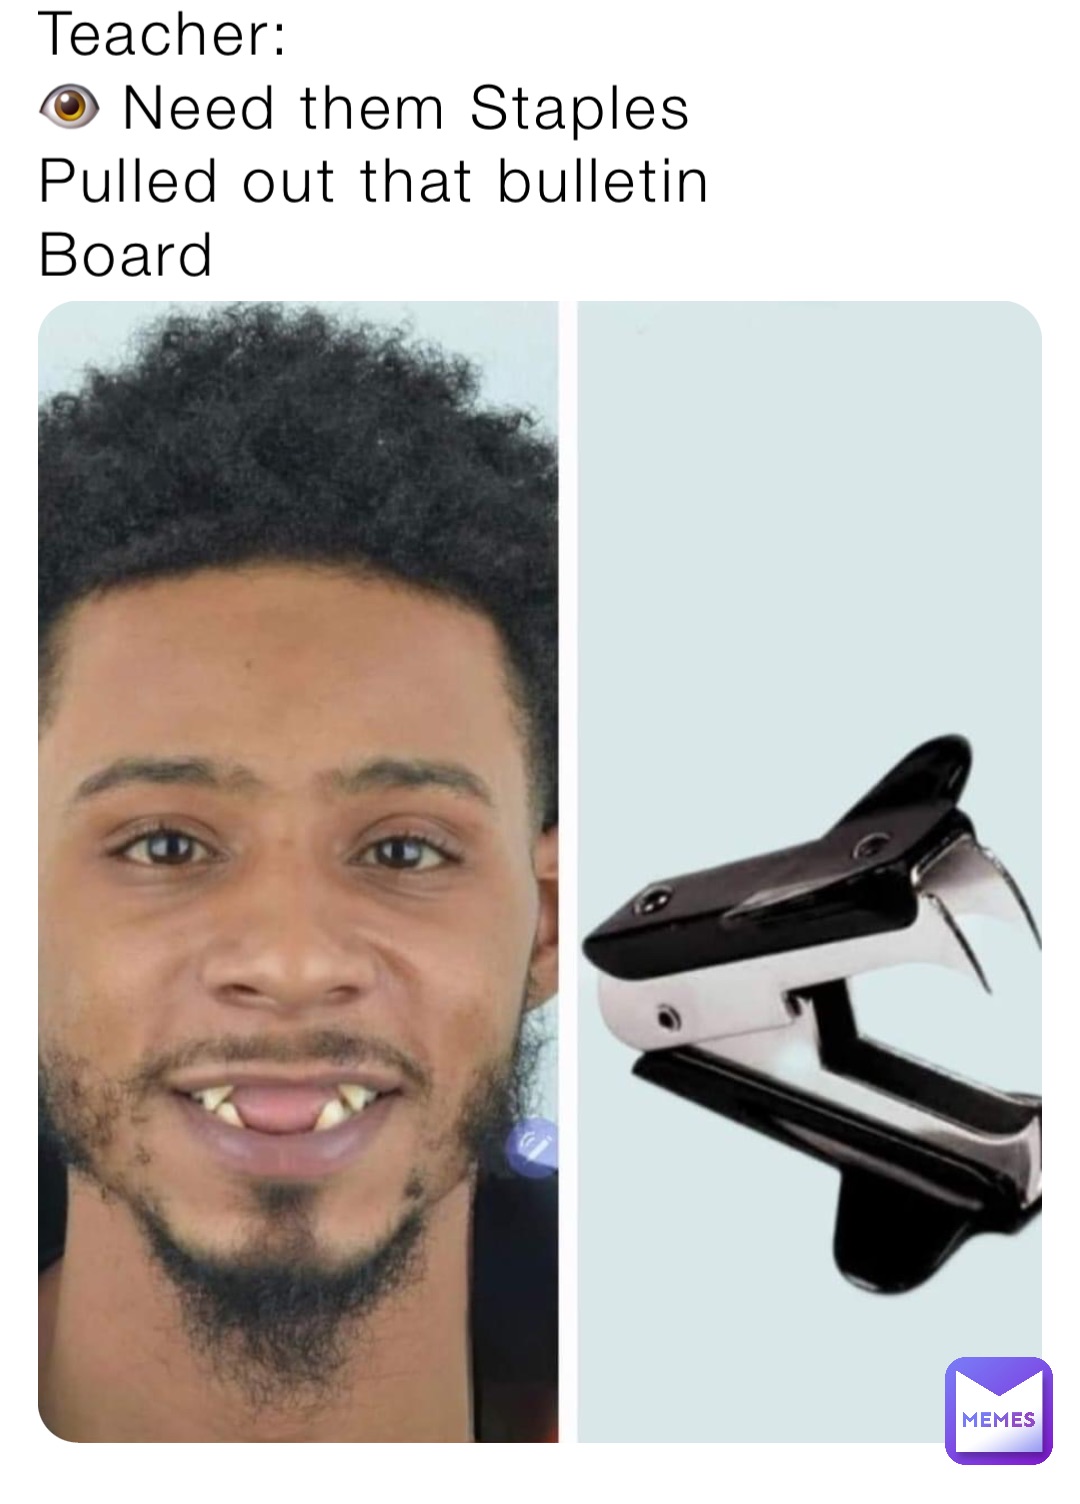 Teacher:
👁️ Need them Staples
Pulled out that bulletin 
Board